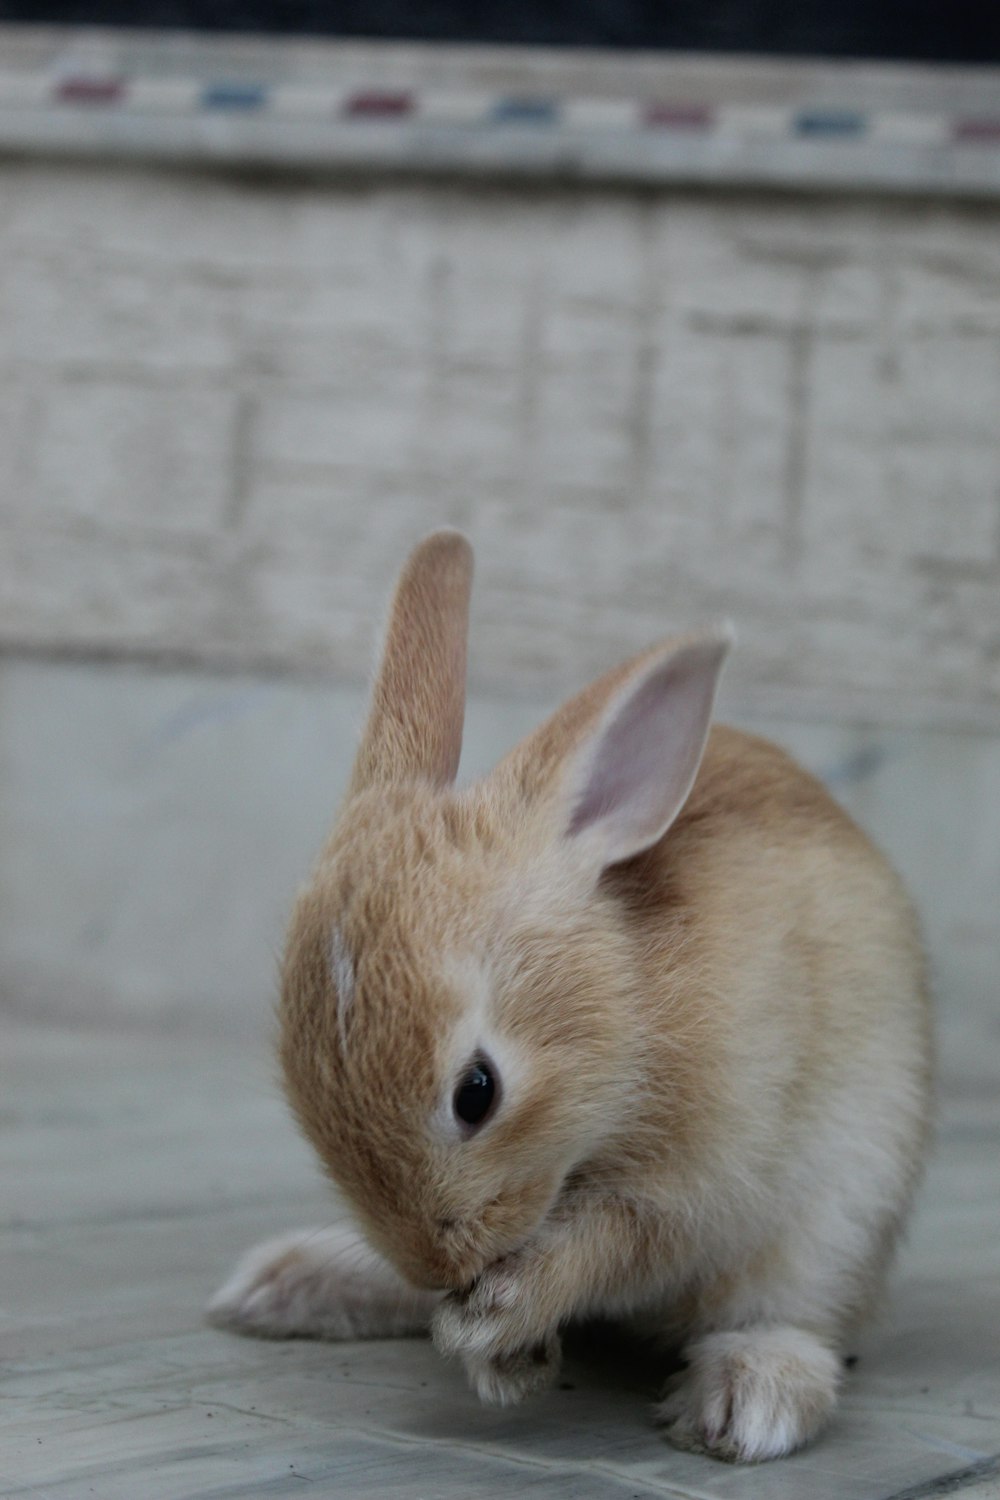 a small rabbit sitting on top of a tiled floor